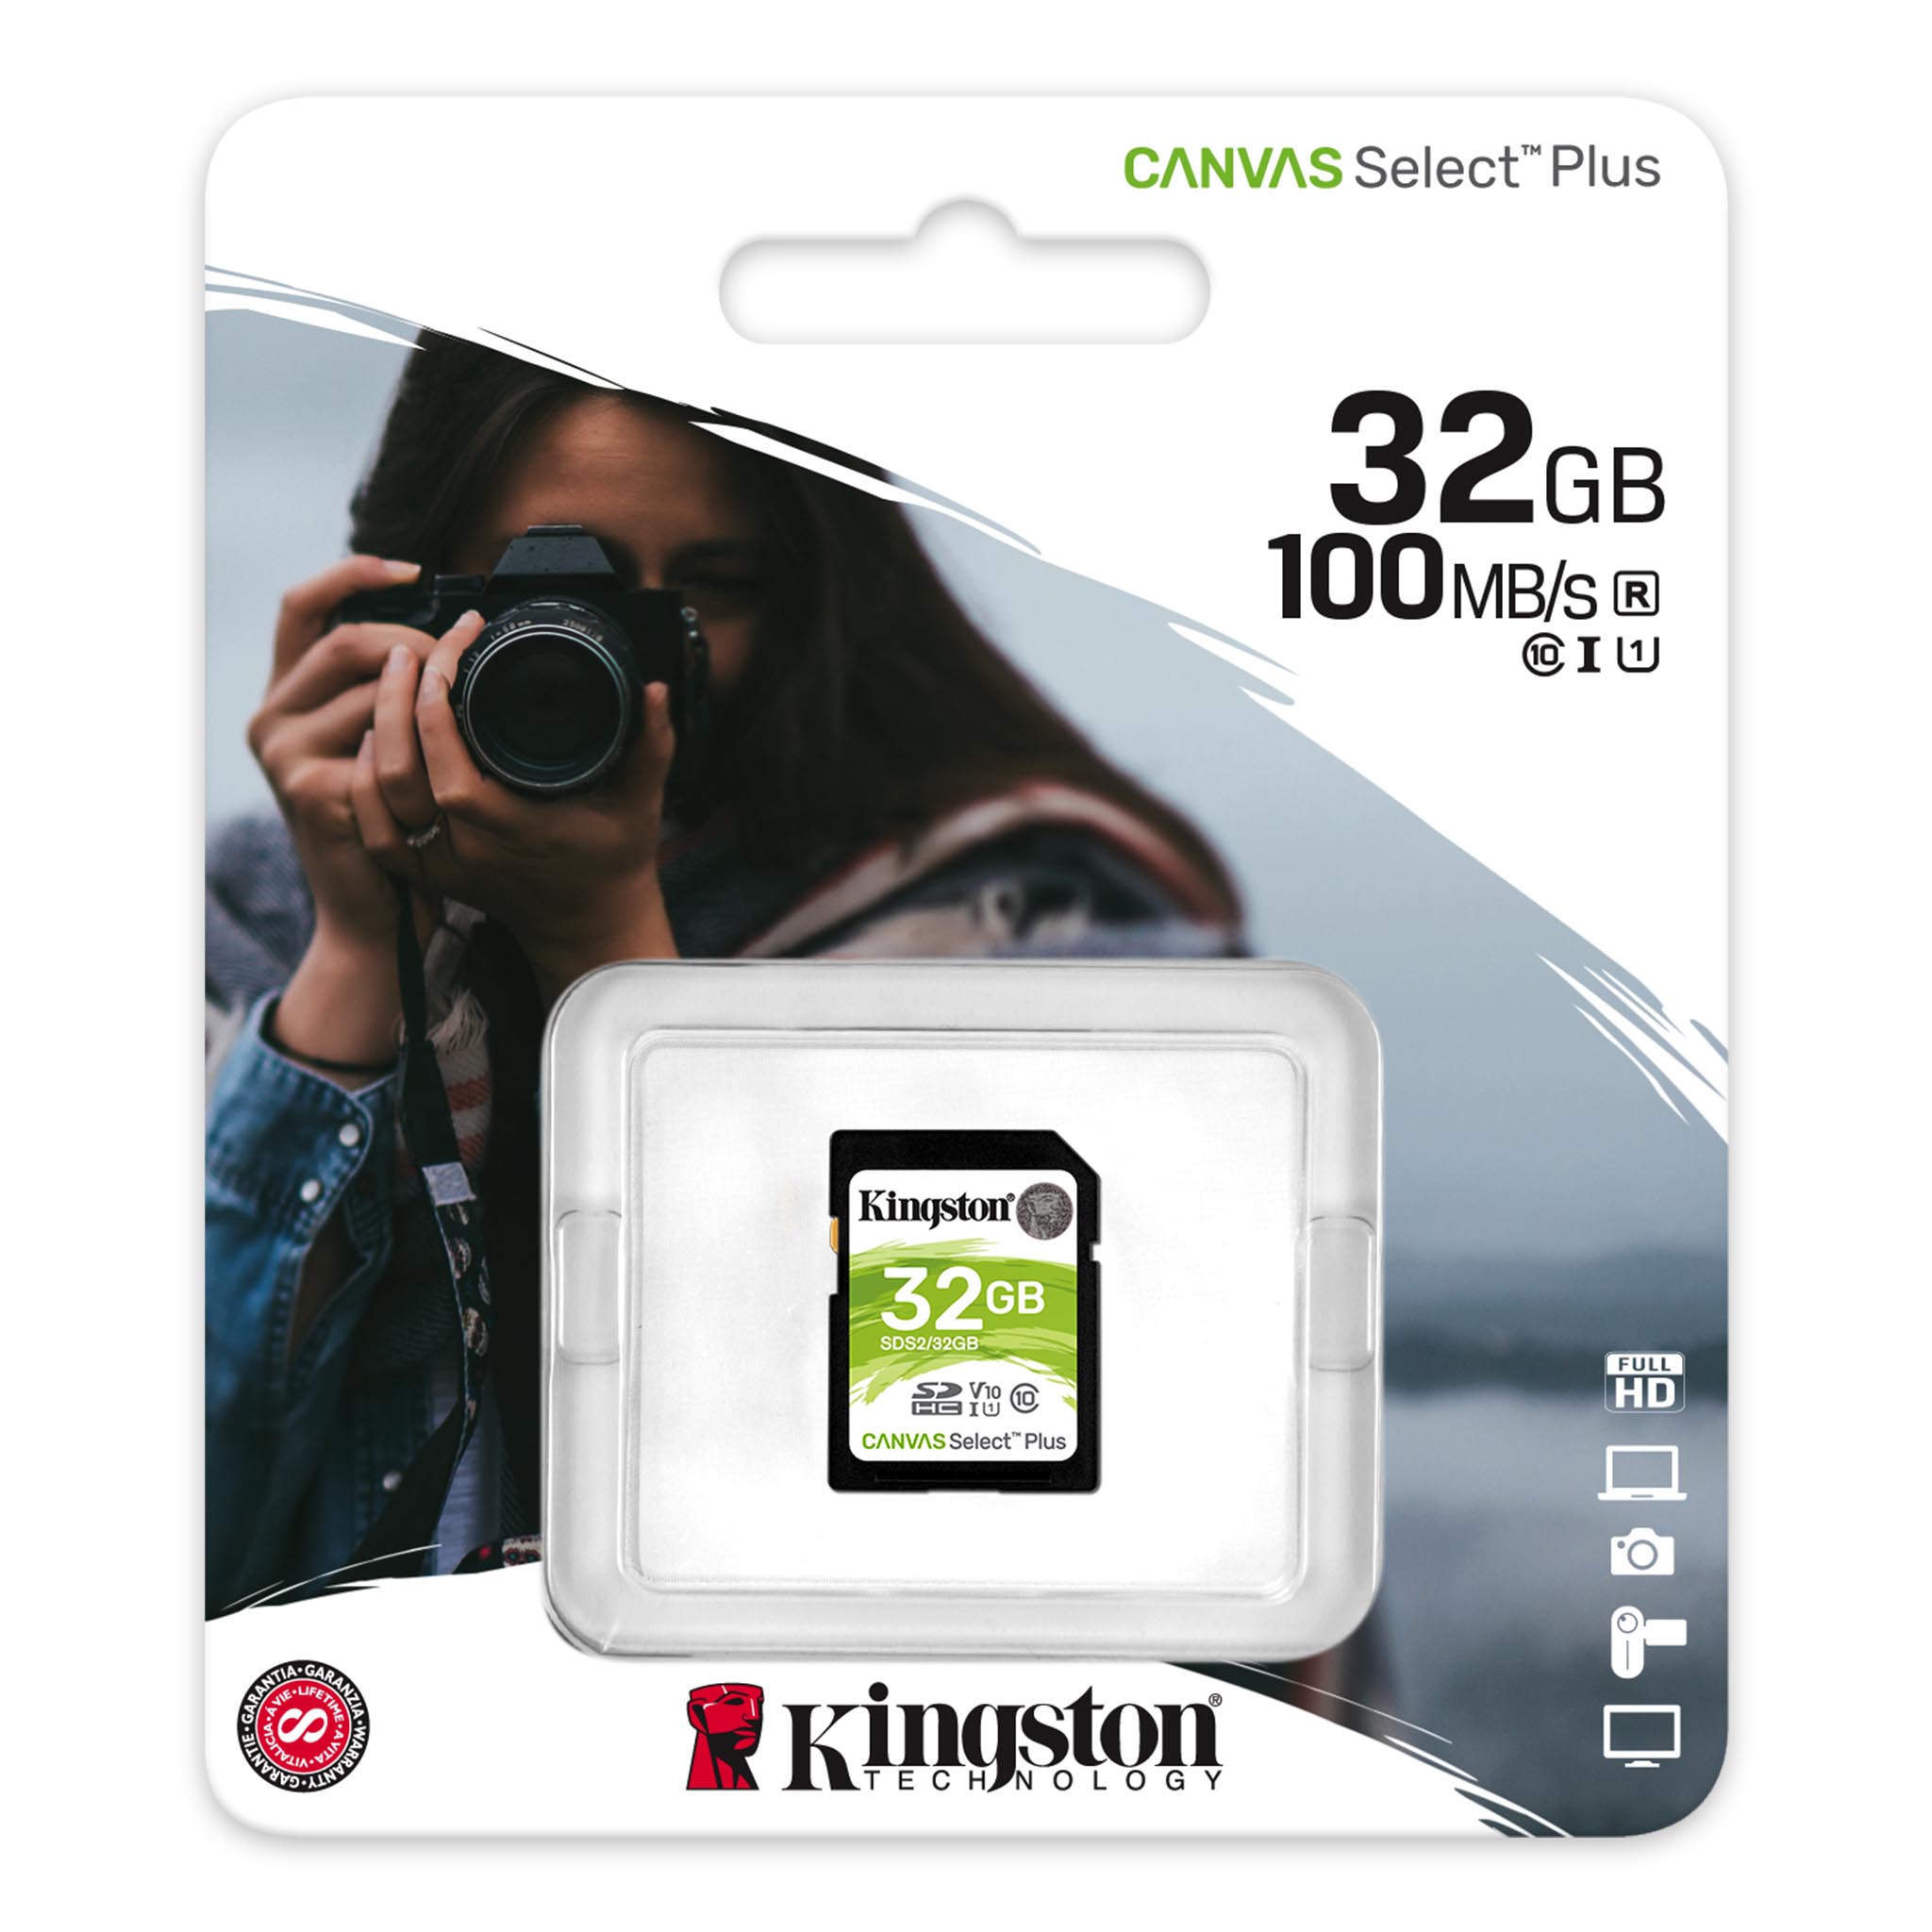 Kingston 32GB Meizu M3 MicroSDHC Canvas Select Plus Card Verified by SanFlash. 100MBs Works with Kingston 